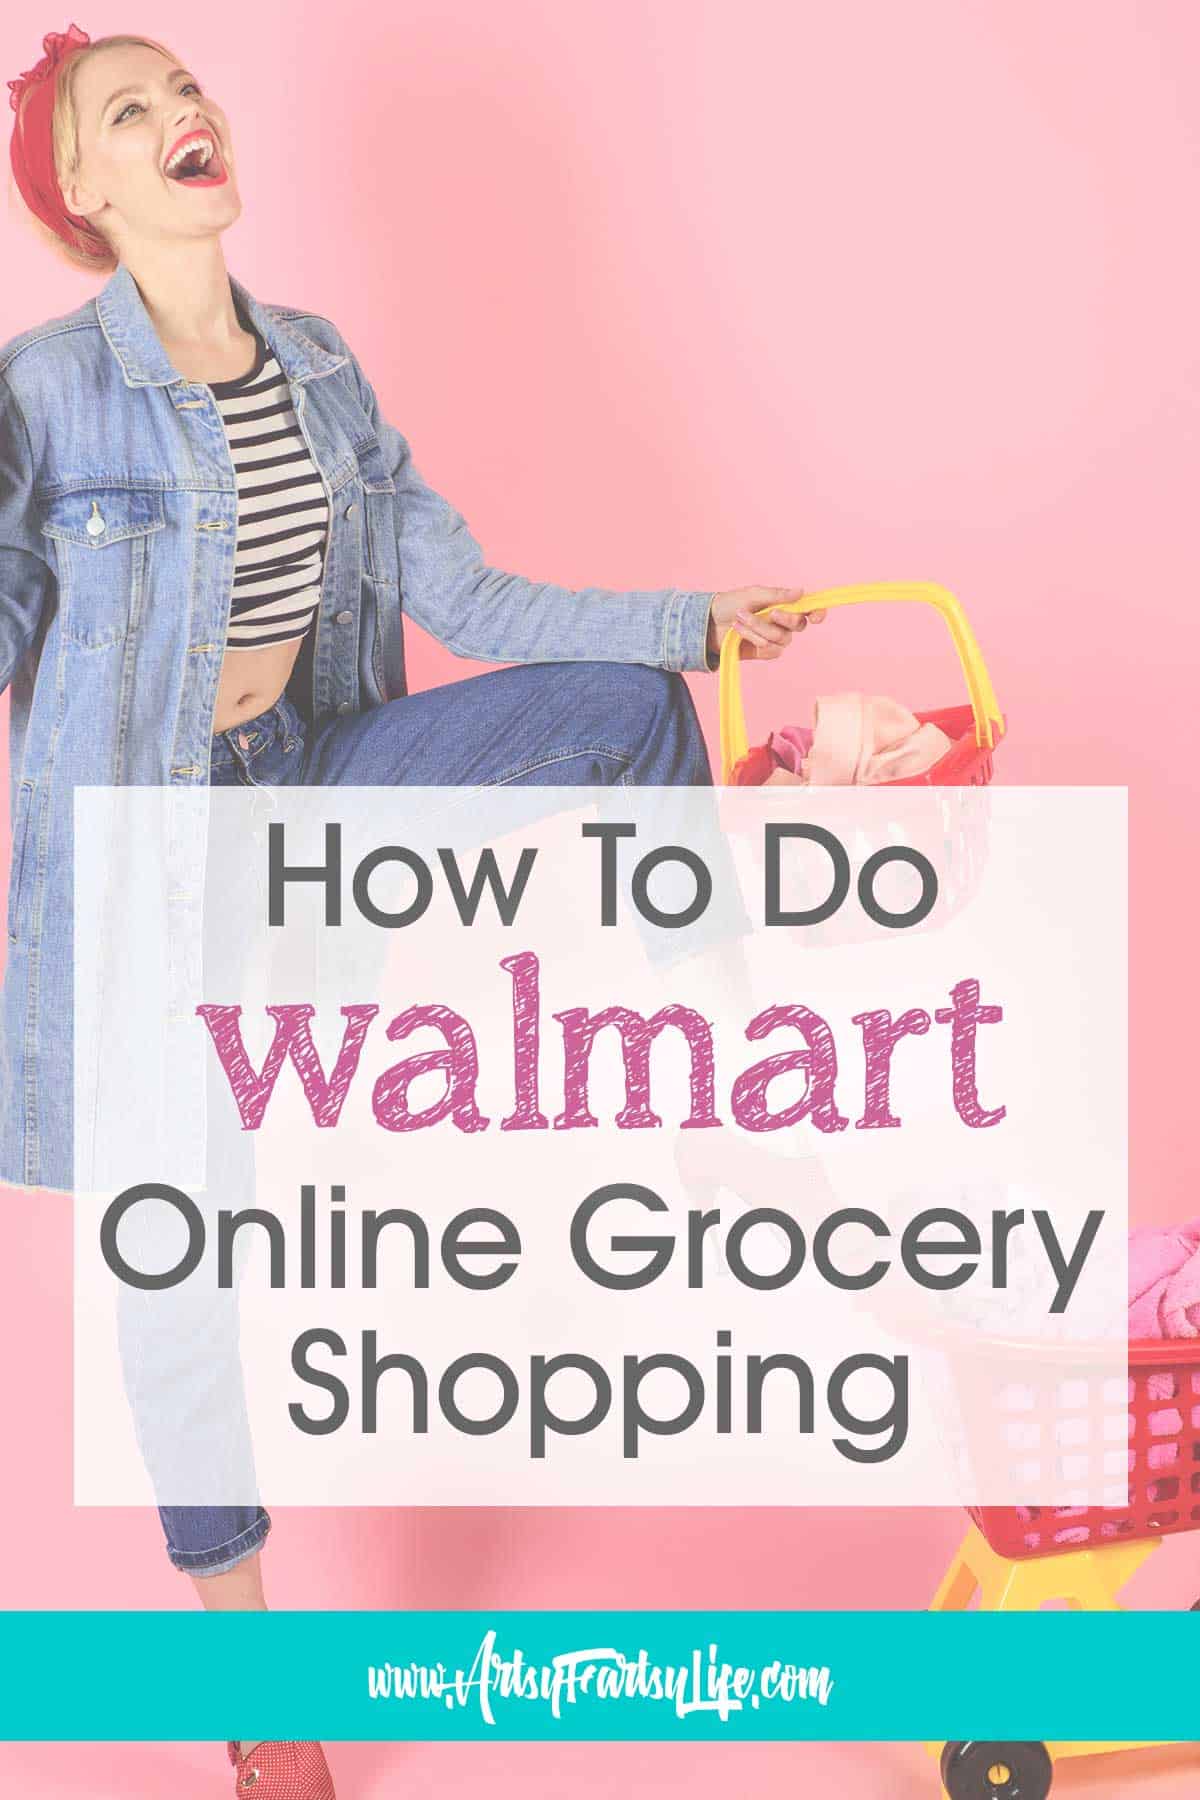 How To Do Walmart Online Grocery Shopping